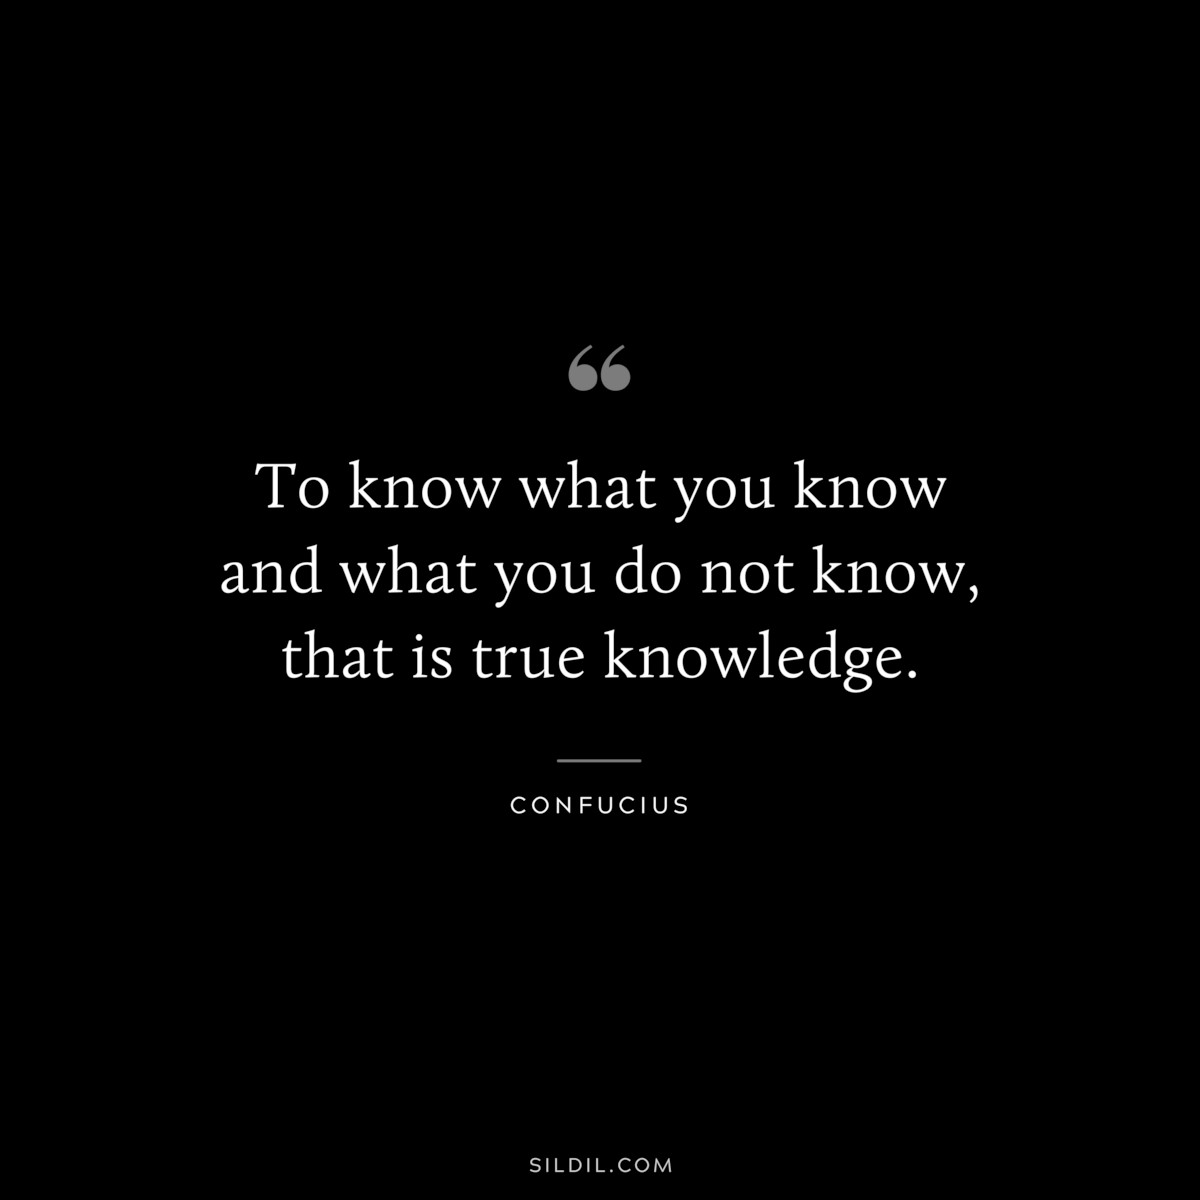 To know what you know and what you do not know, that is true knowledge. ― Confucius